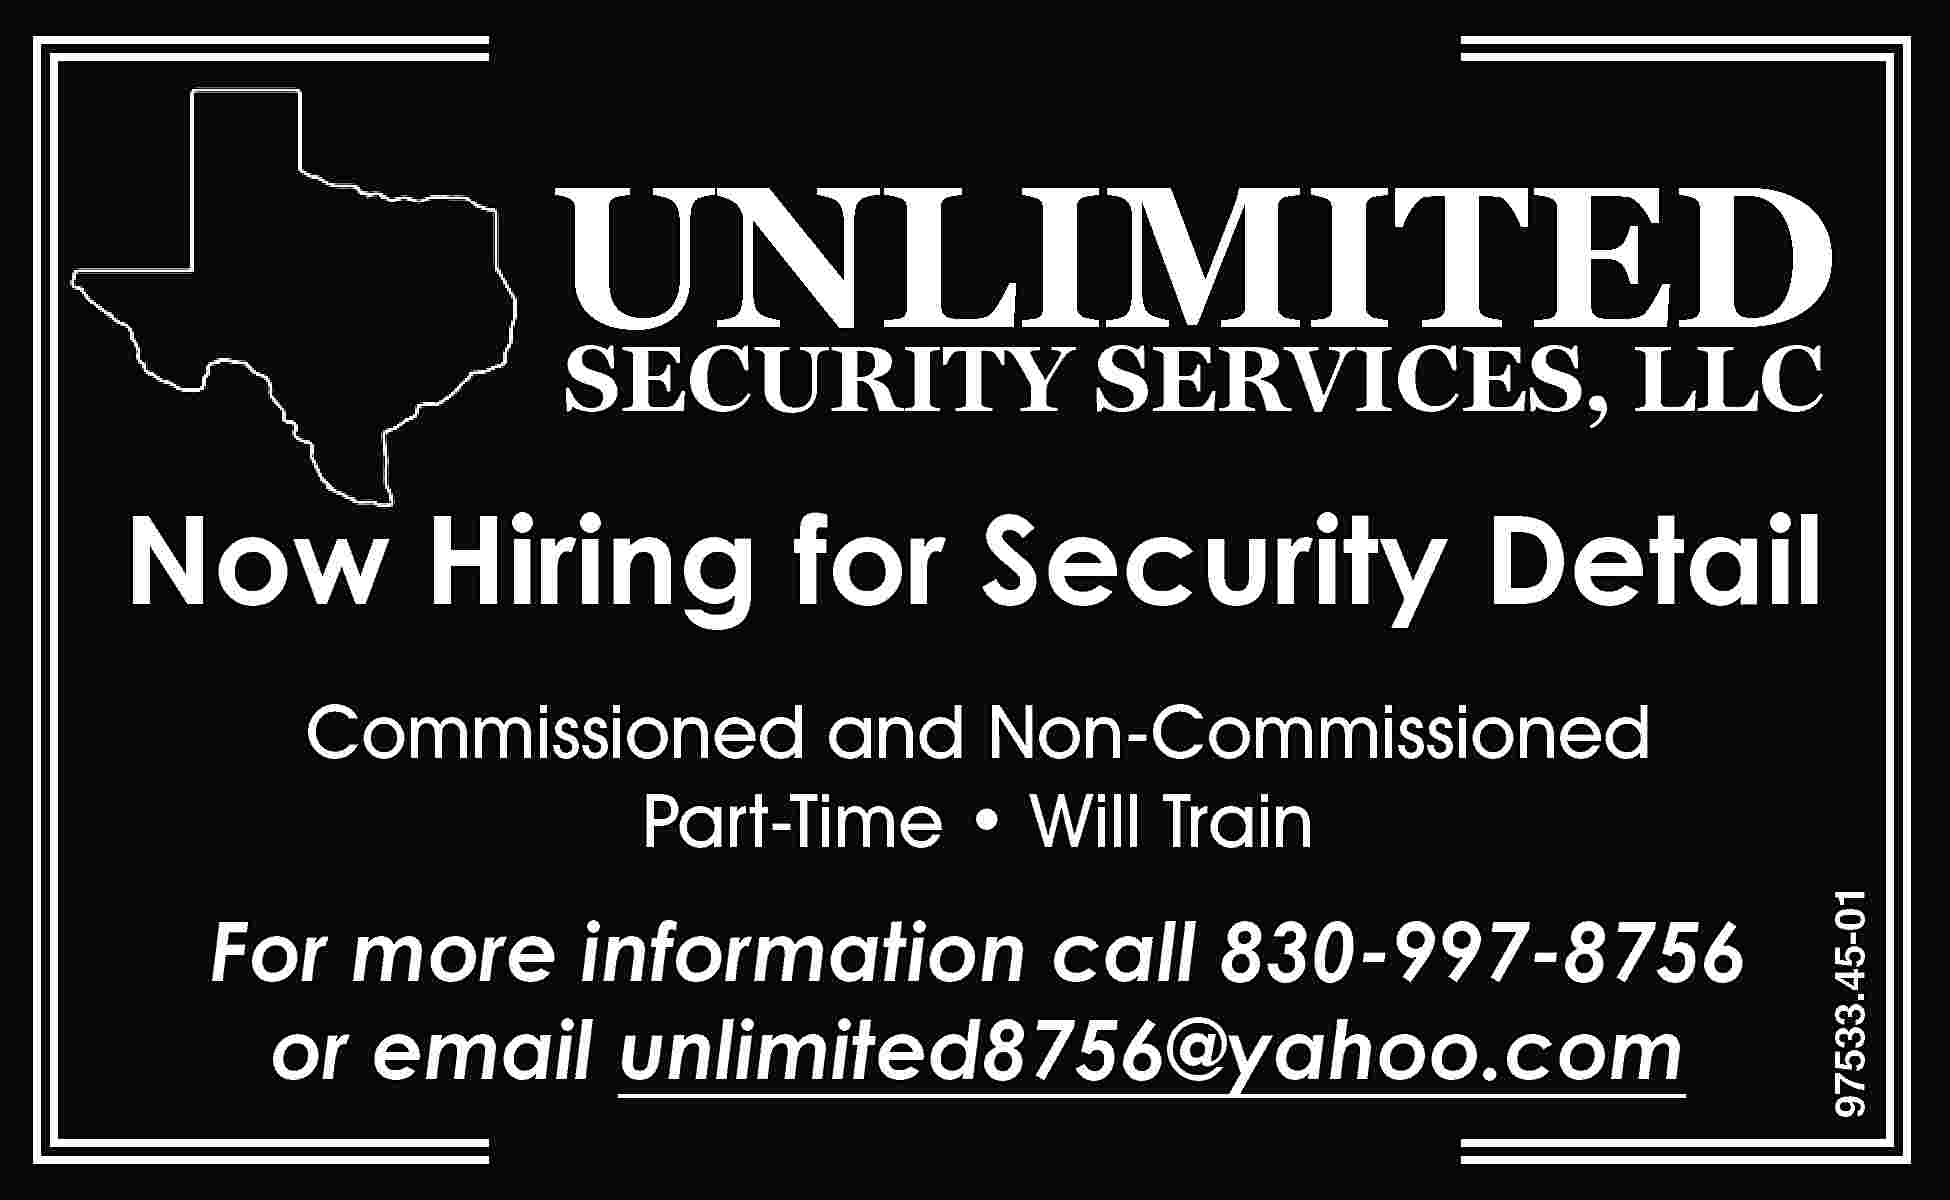 UNLIMITED SECURITY SERVICES, LLC Now  UNLIMITED SECURITY SERVICES, LLC Now Hiring for Security Detail For more information call 830-997-8756 or email unlimited8756@yahoo.com 97533.45-01 Commissioned and Non-Commissioned Part-Time • Will Train